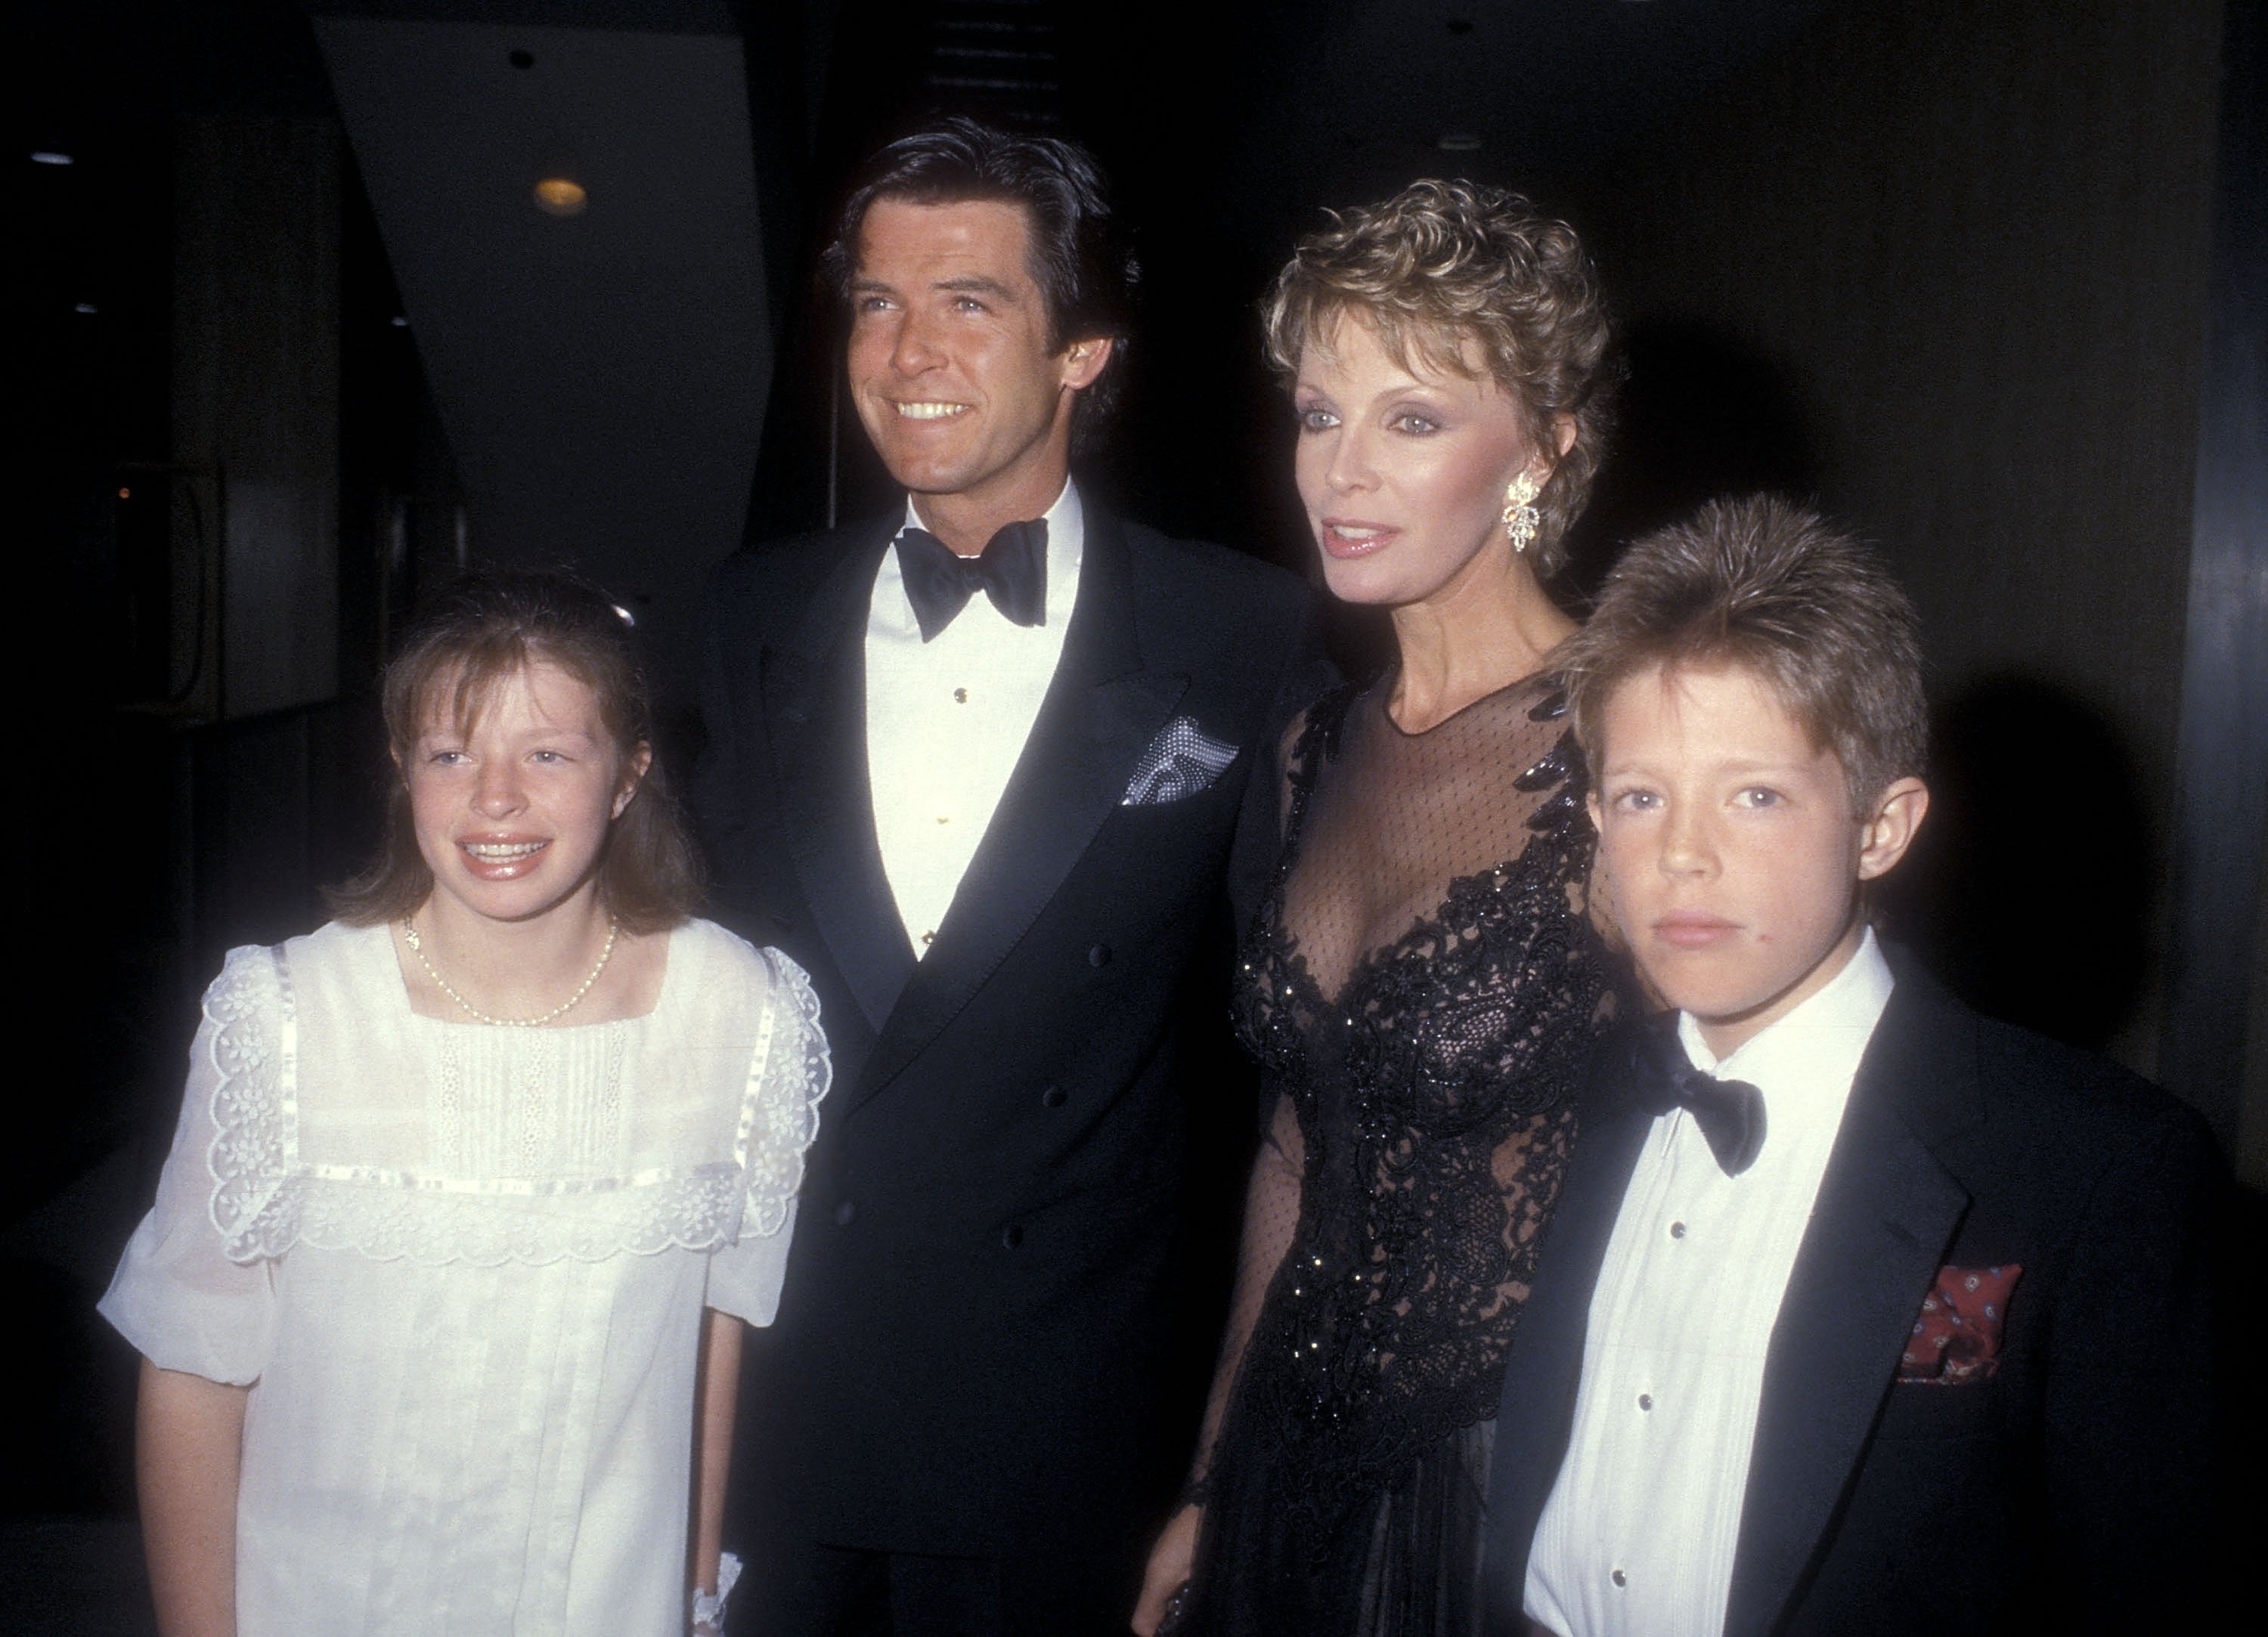 Actor Pierce Brosnan, wife Cassandra Harris, daughter Charlotte Harris and Christopher Harris attend the "Cats" Opening Night Musical Performance on January 11, 1985 at the Shubert Theatre in Century City, California. | Source: Getty Images